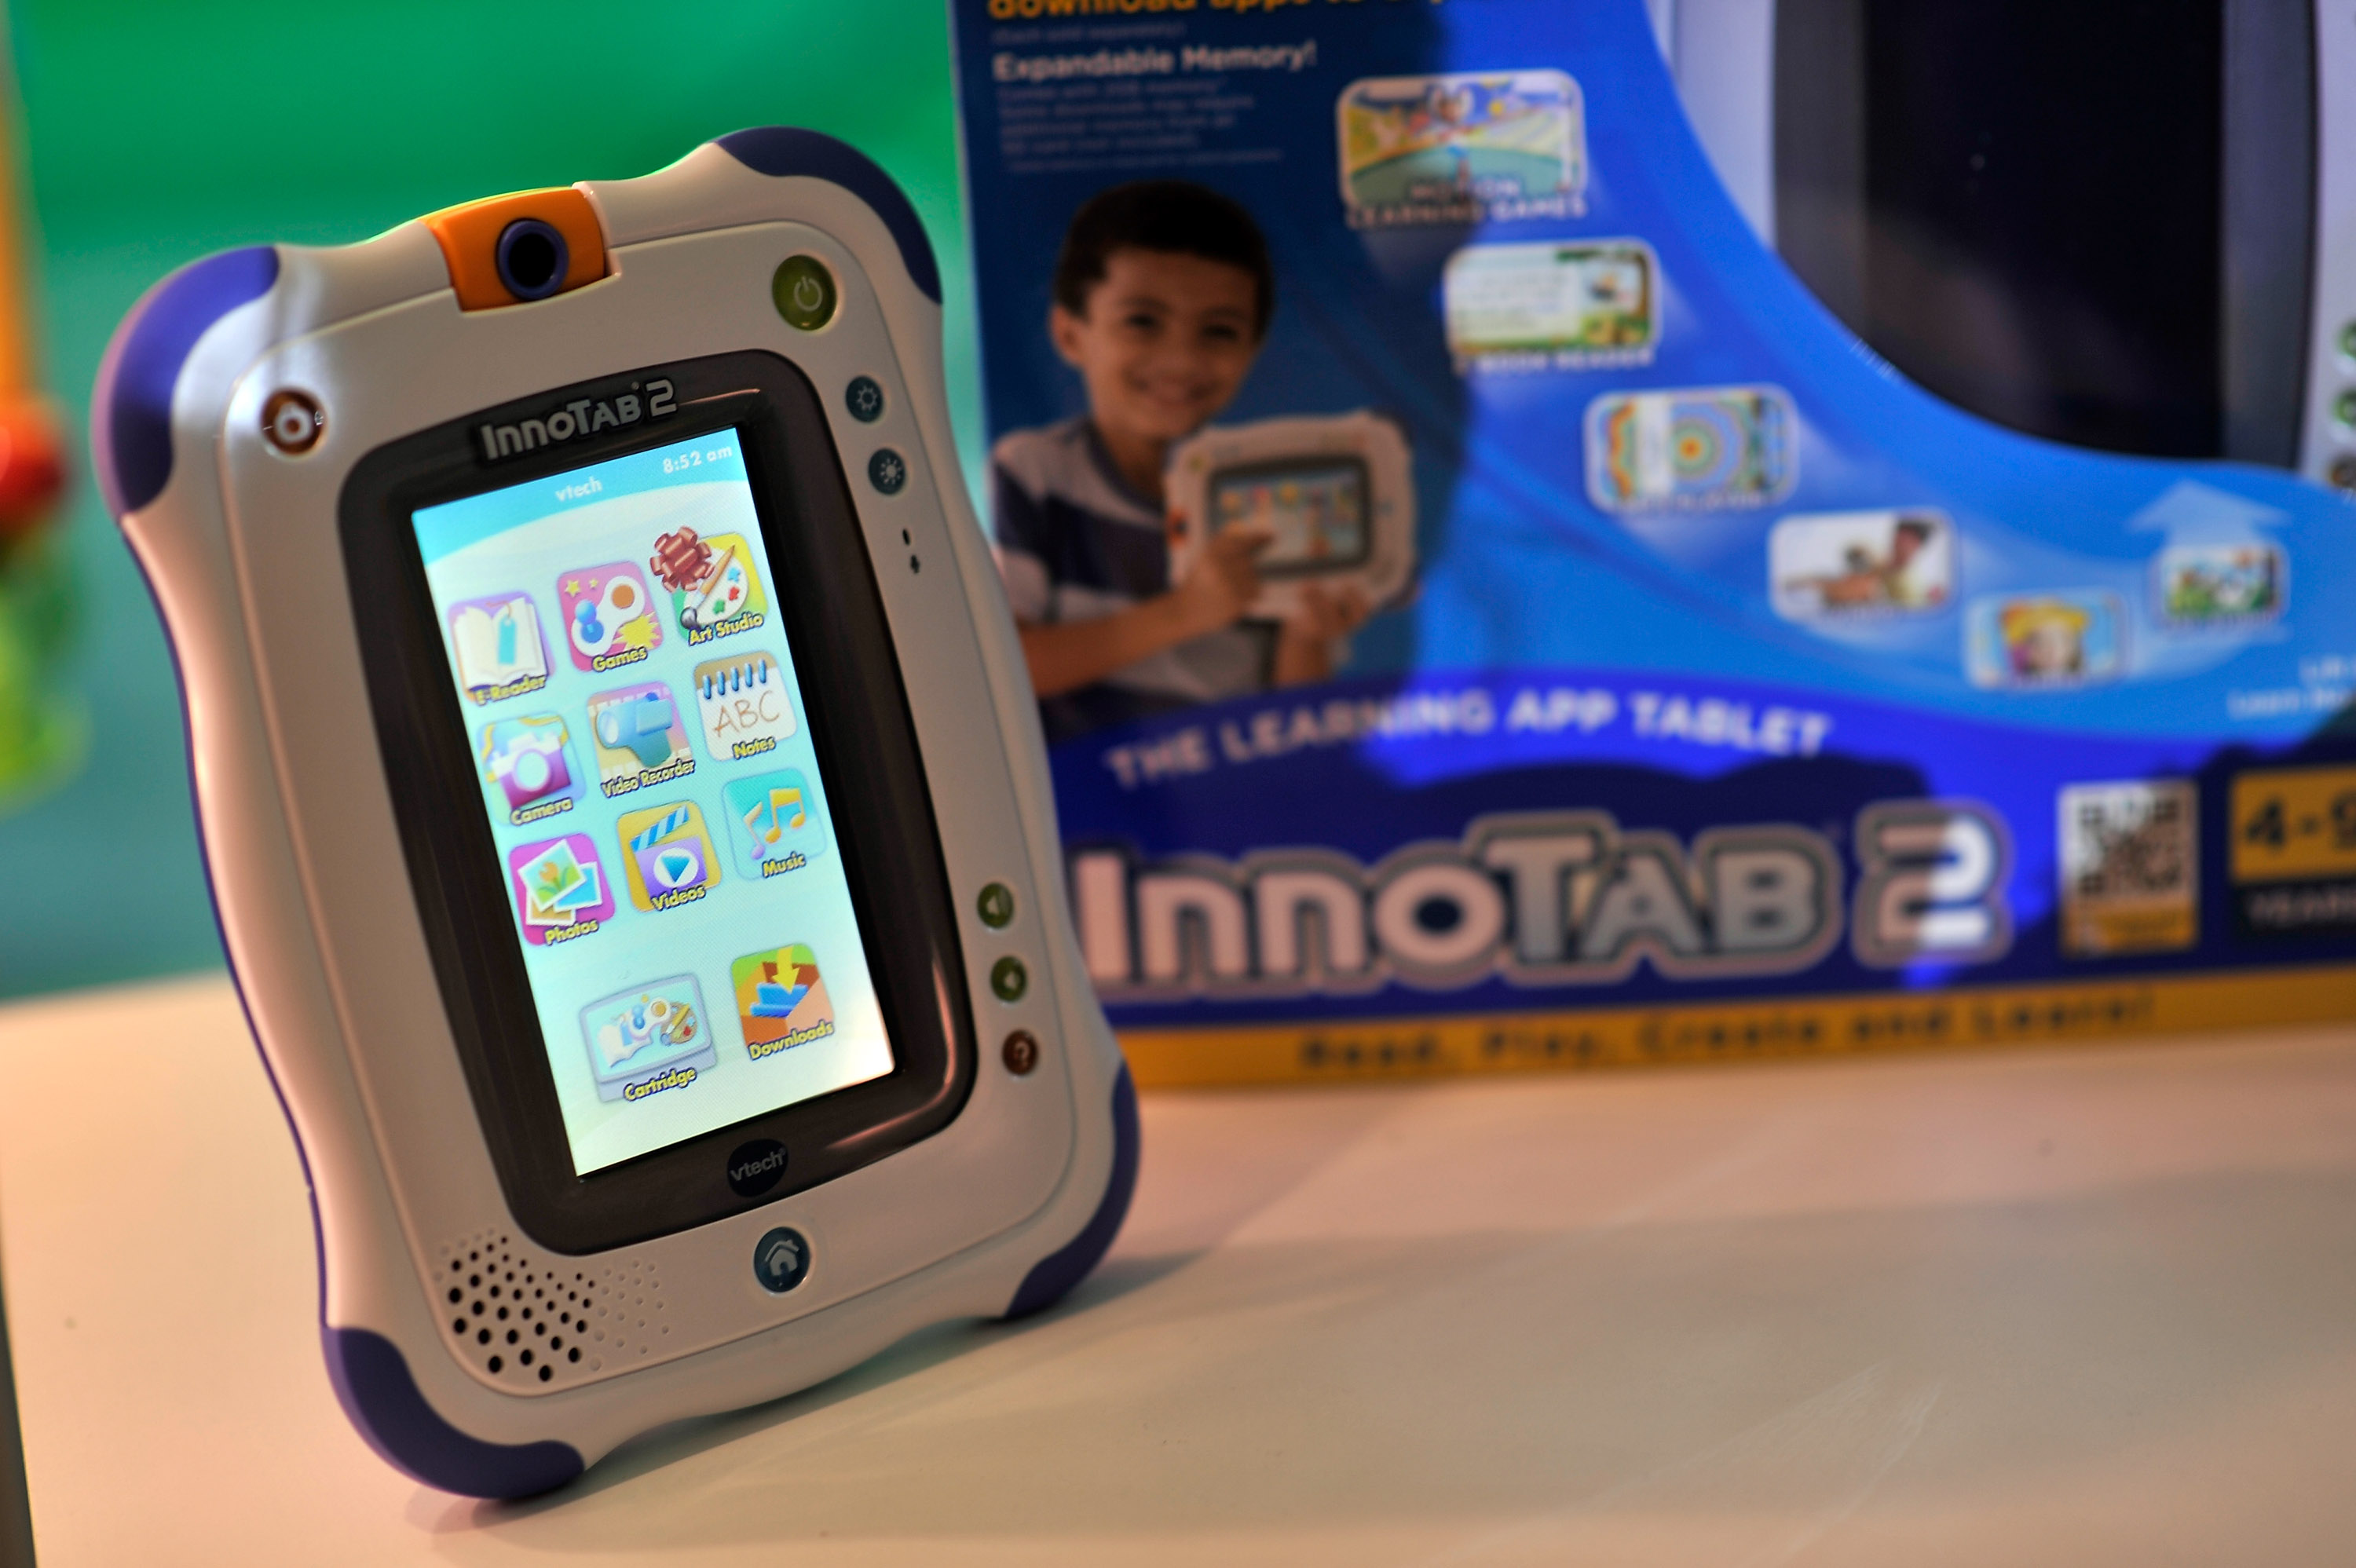 The VTech InnoTab 2, Oct. 31, 2012 (Gareth Cattermole—Getty Images)